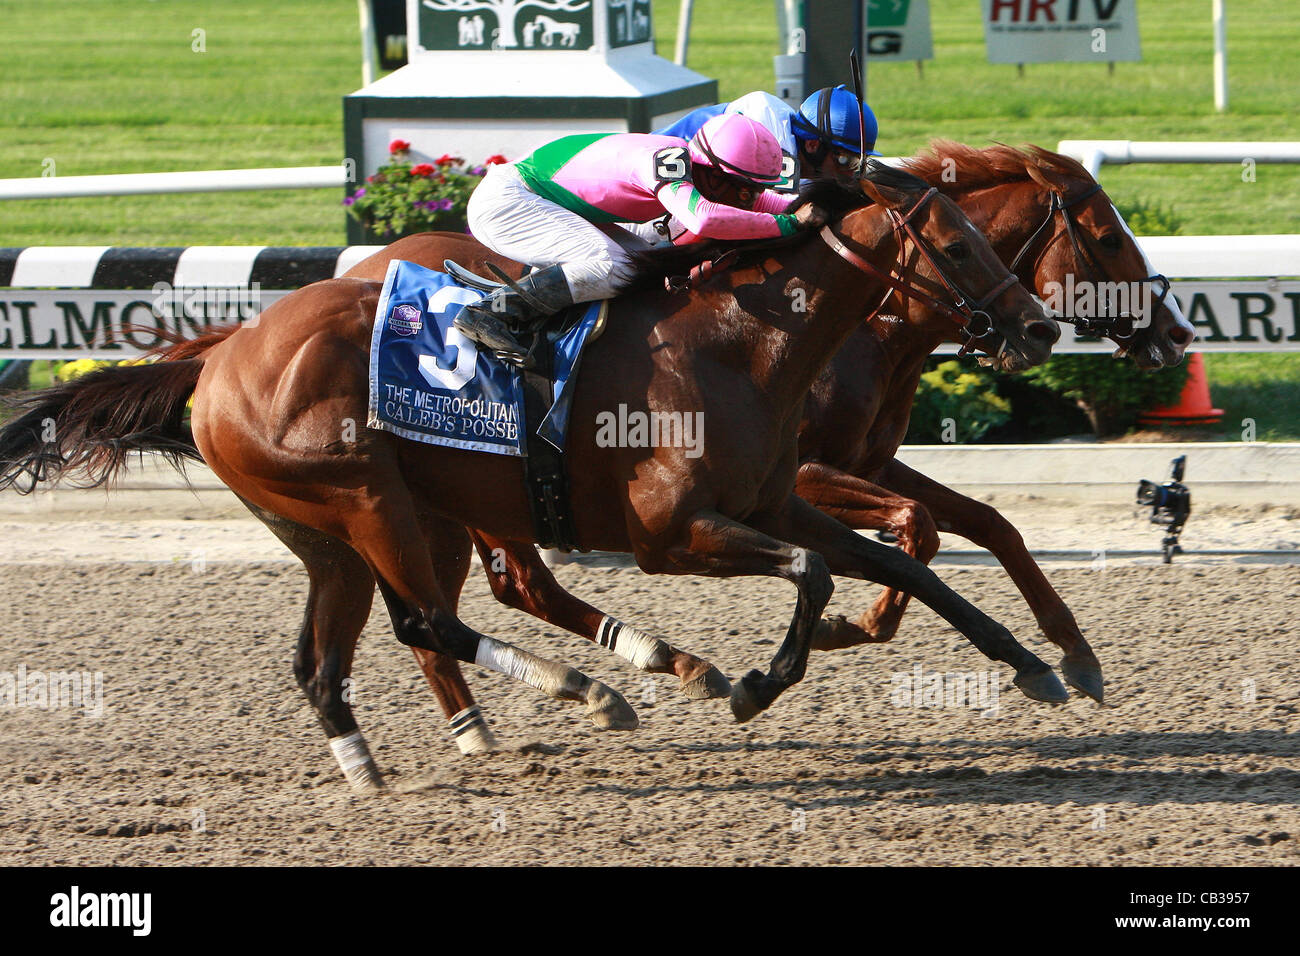 May 28, 2012 - Elmont, New York, U.S. - Shackleford & John Velazquez holds off Caleb's Posse to win the Grade I ''Win & You're In'' Metropolitan Mile Handicap for 3 year olds & up, going 1 mile at Belmont Park.  Trainer Dale Romans.  Owners Michael Lauffer & Wd Cubbedge (Credit Image: © Sue Kawczyns Stock Photo